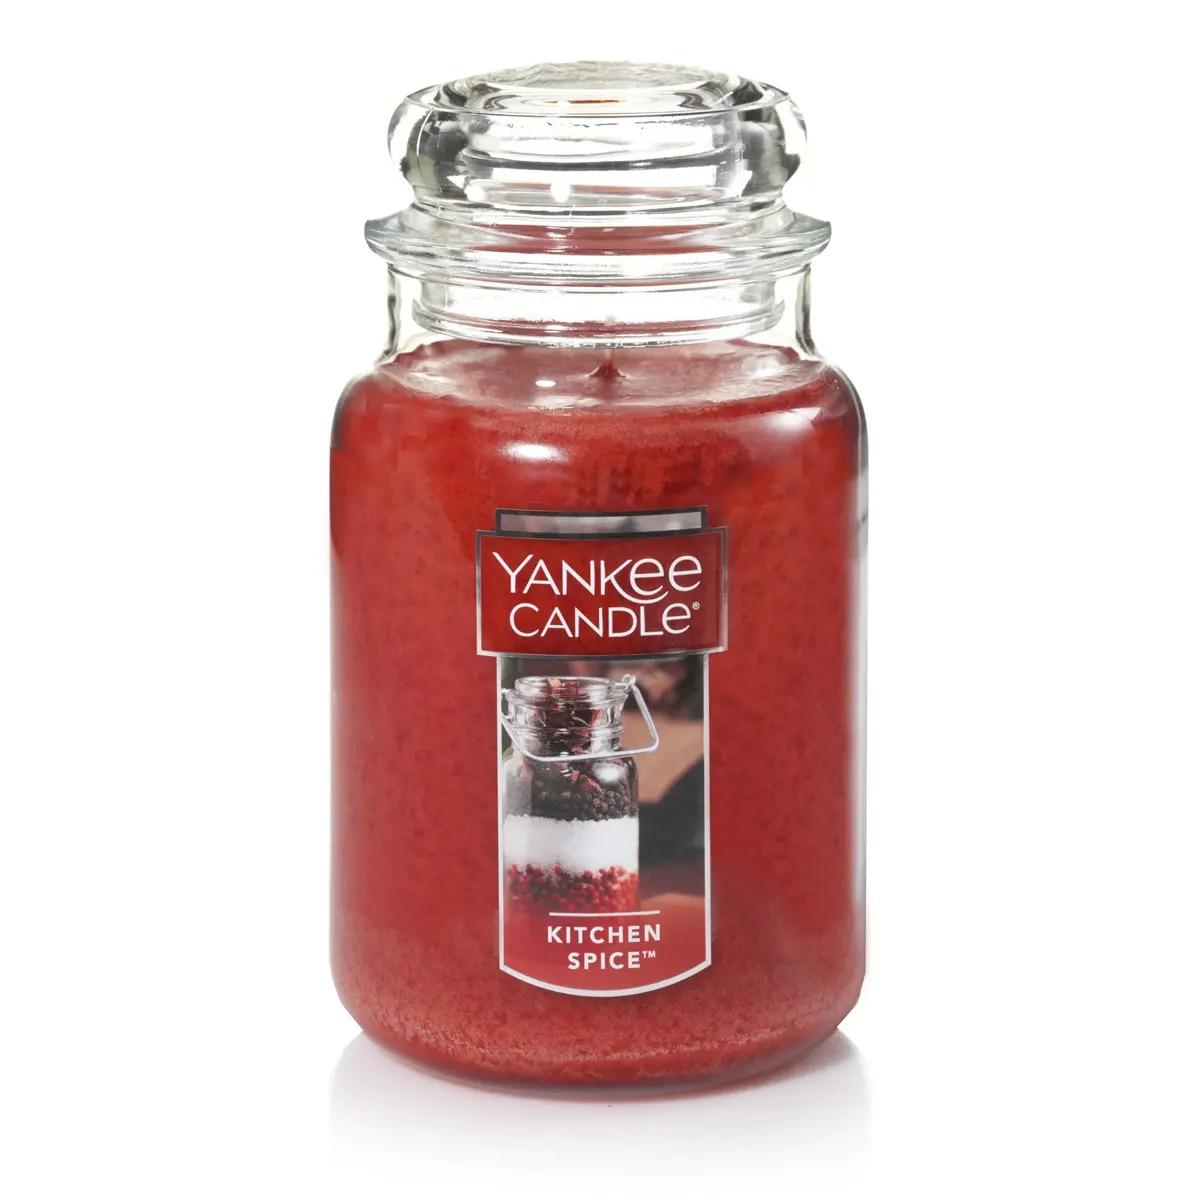 Yankee Candle Kitchen Spice Large Jar for $10